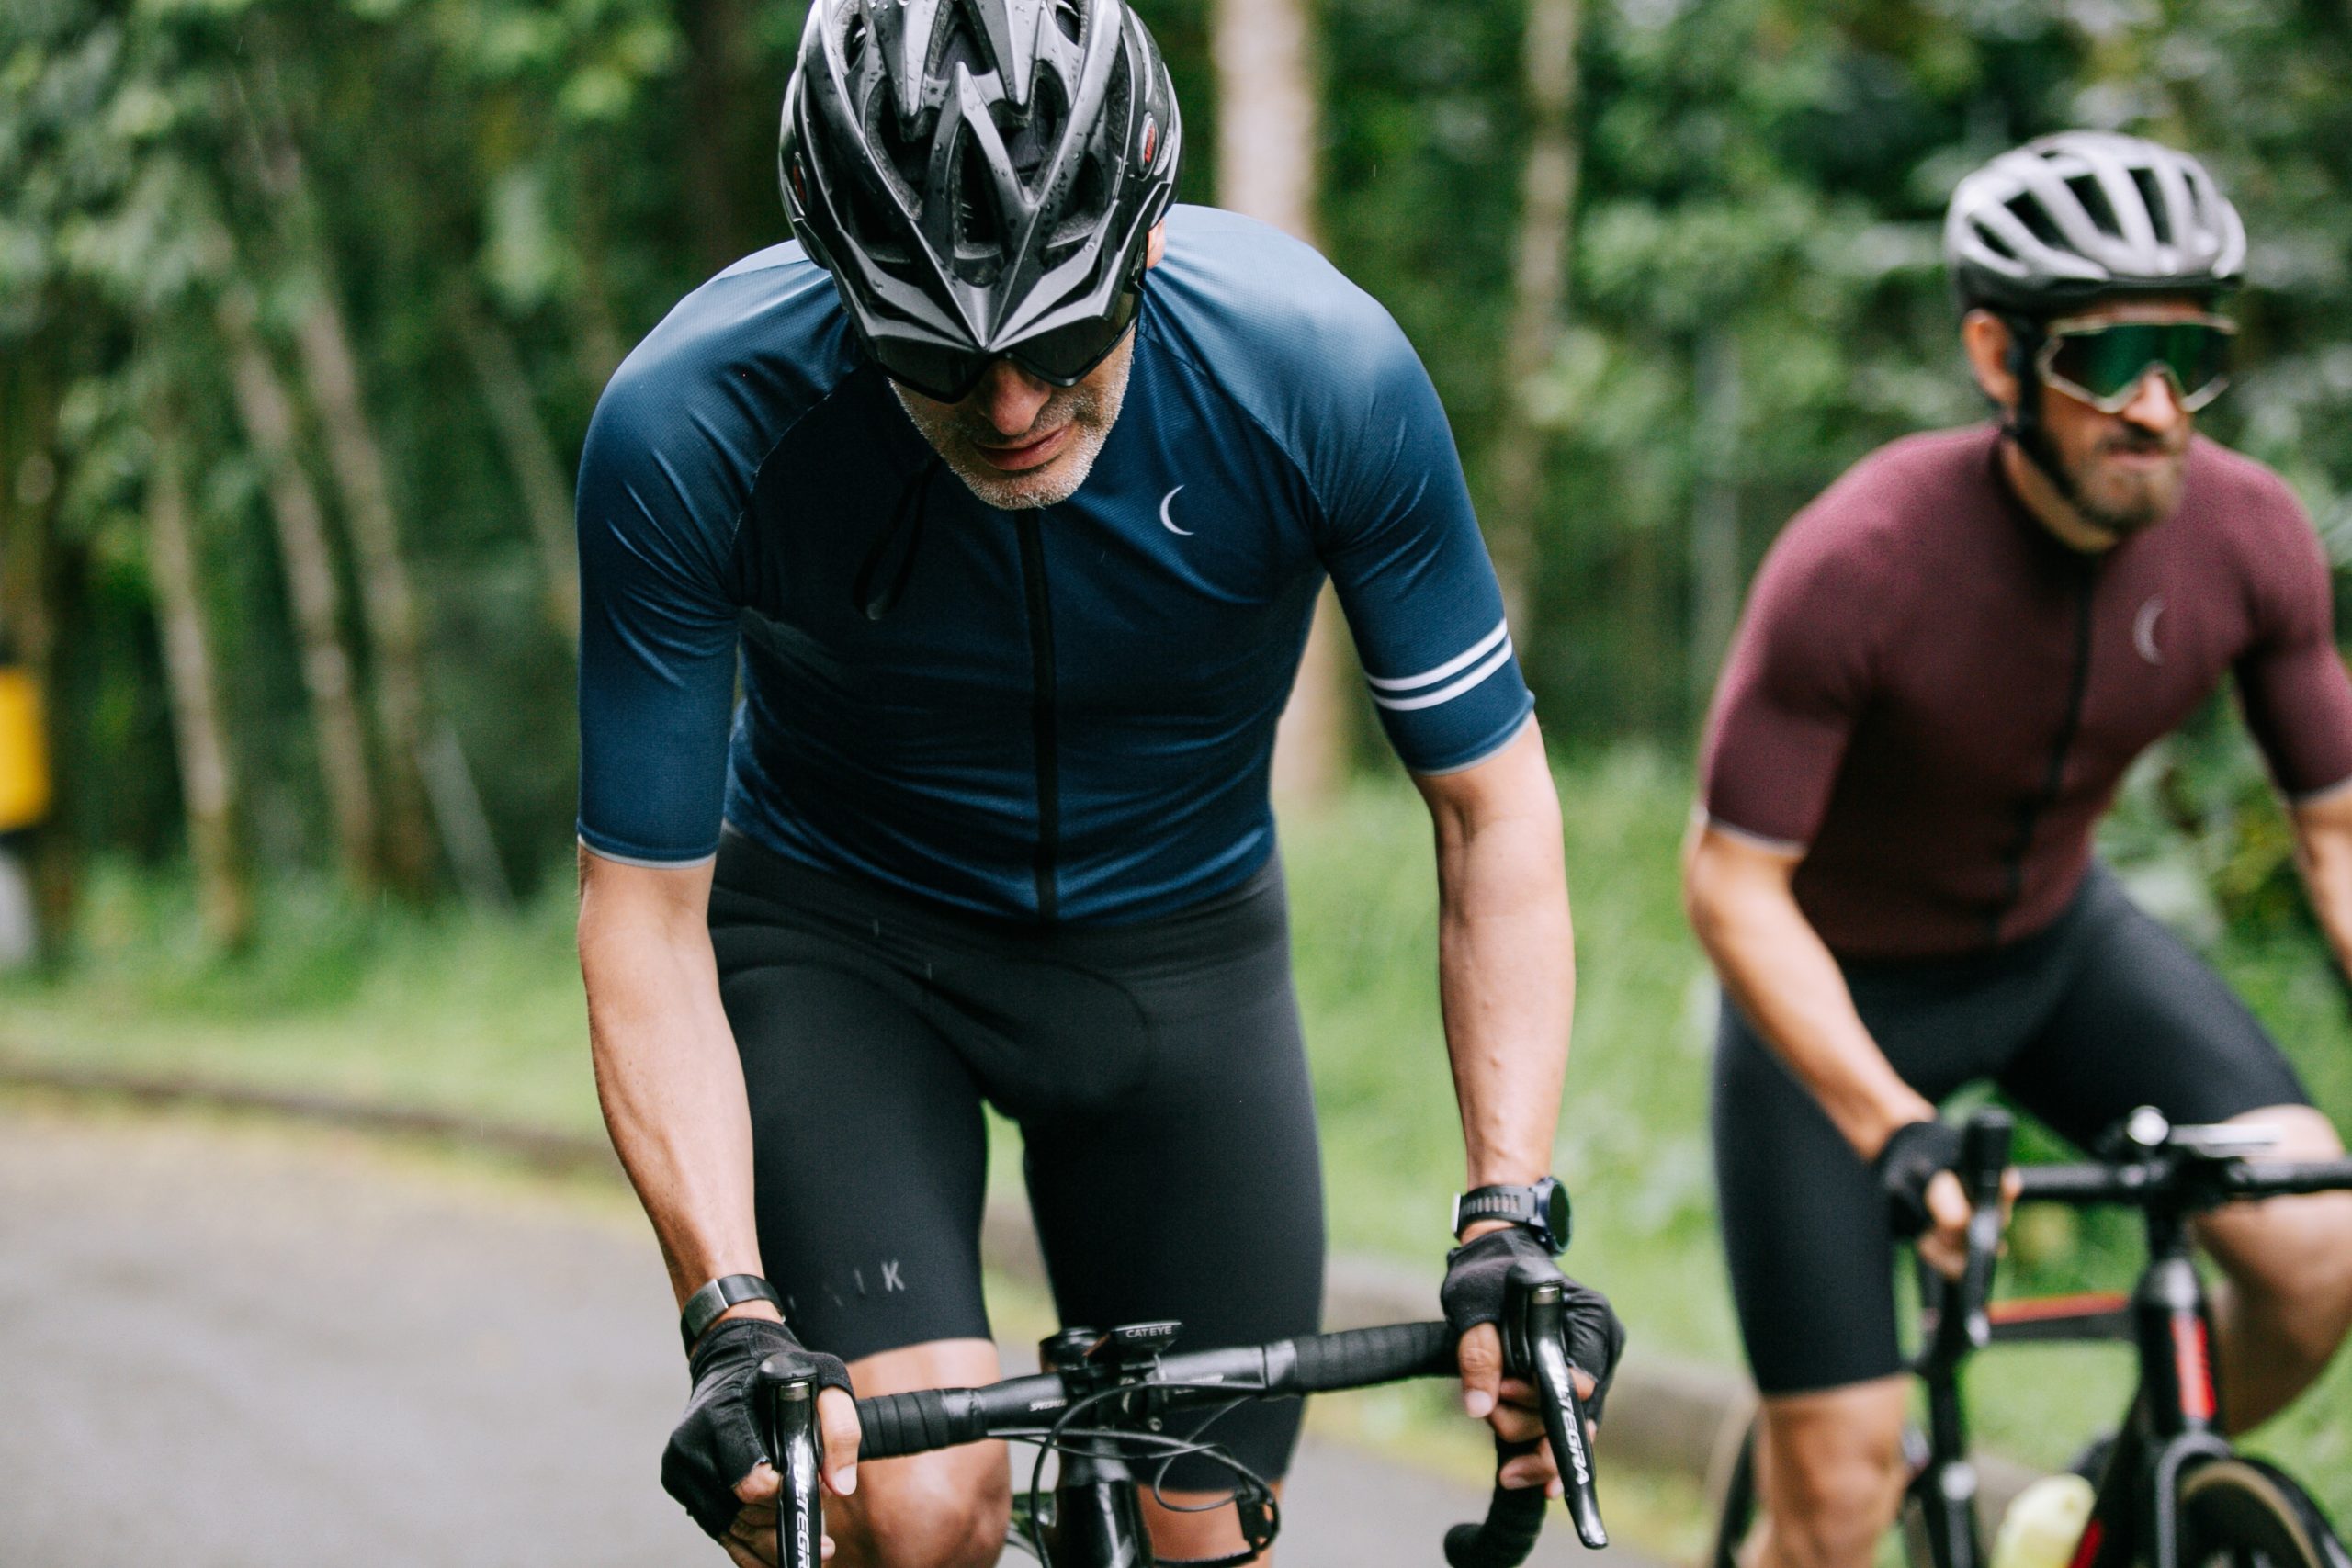 Elite Multisport coach Mike Trees breaks down how to improve your cycling performance and increase your FTP.